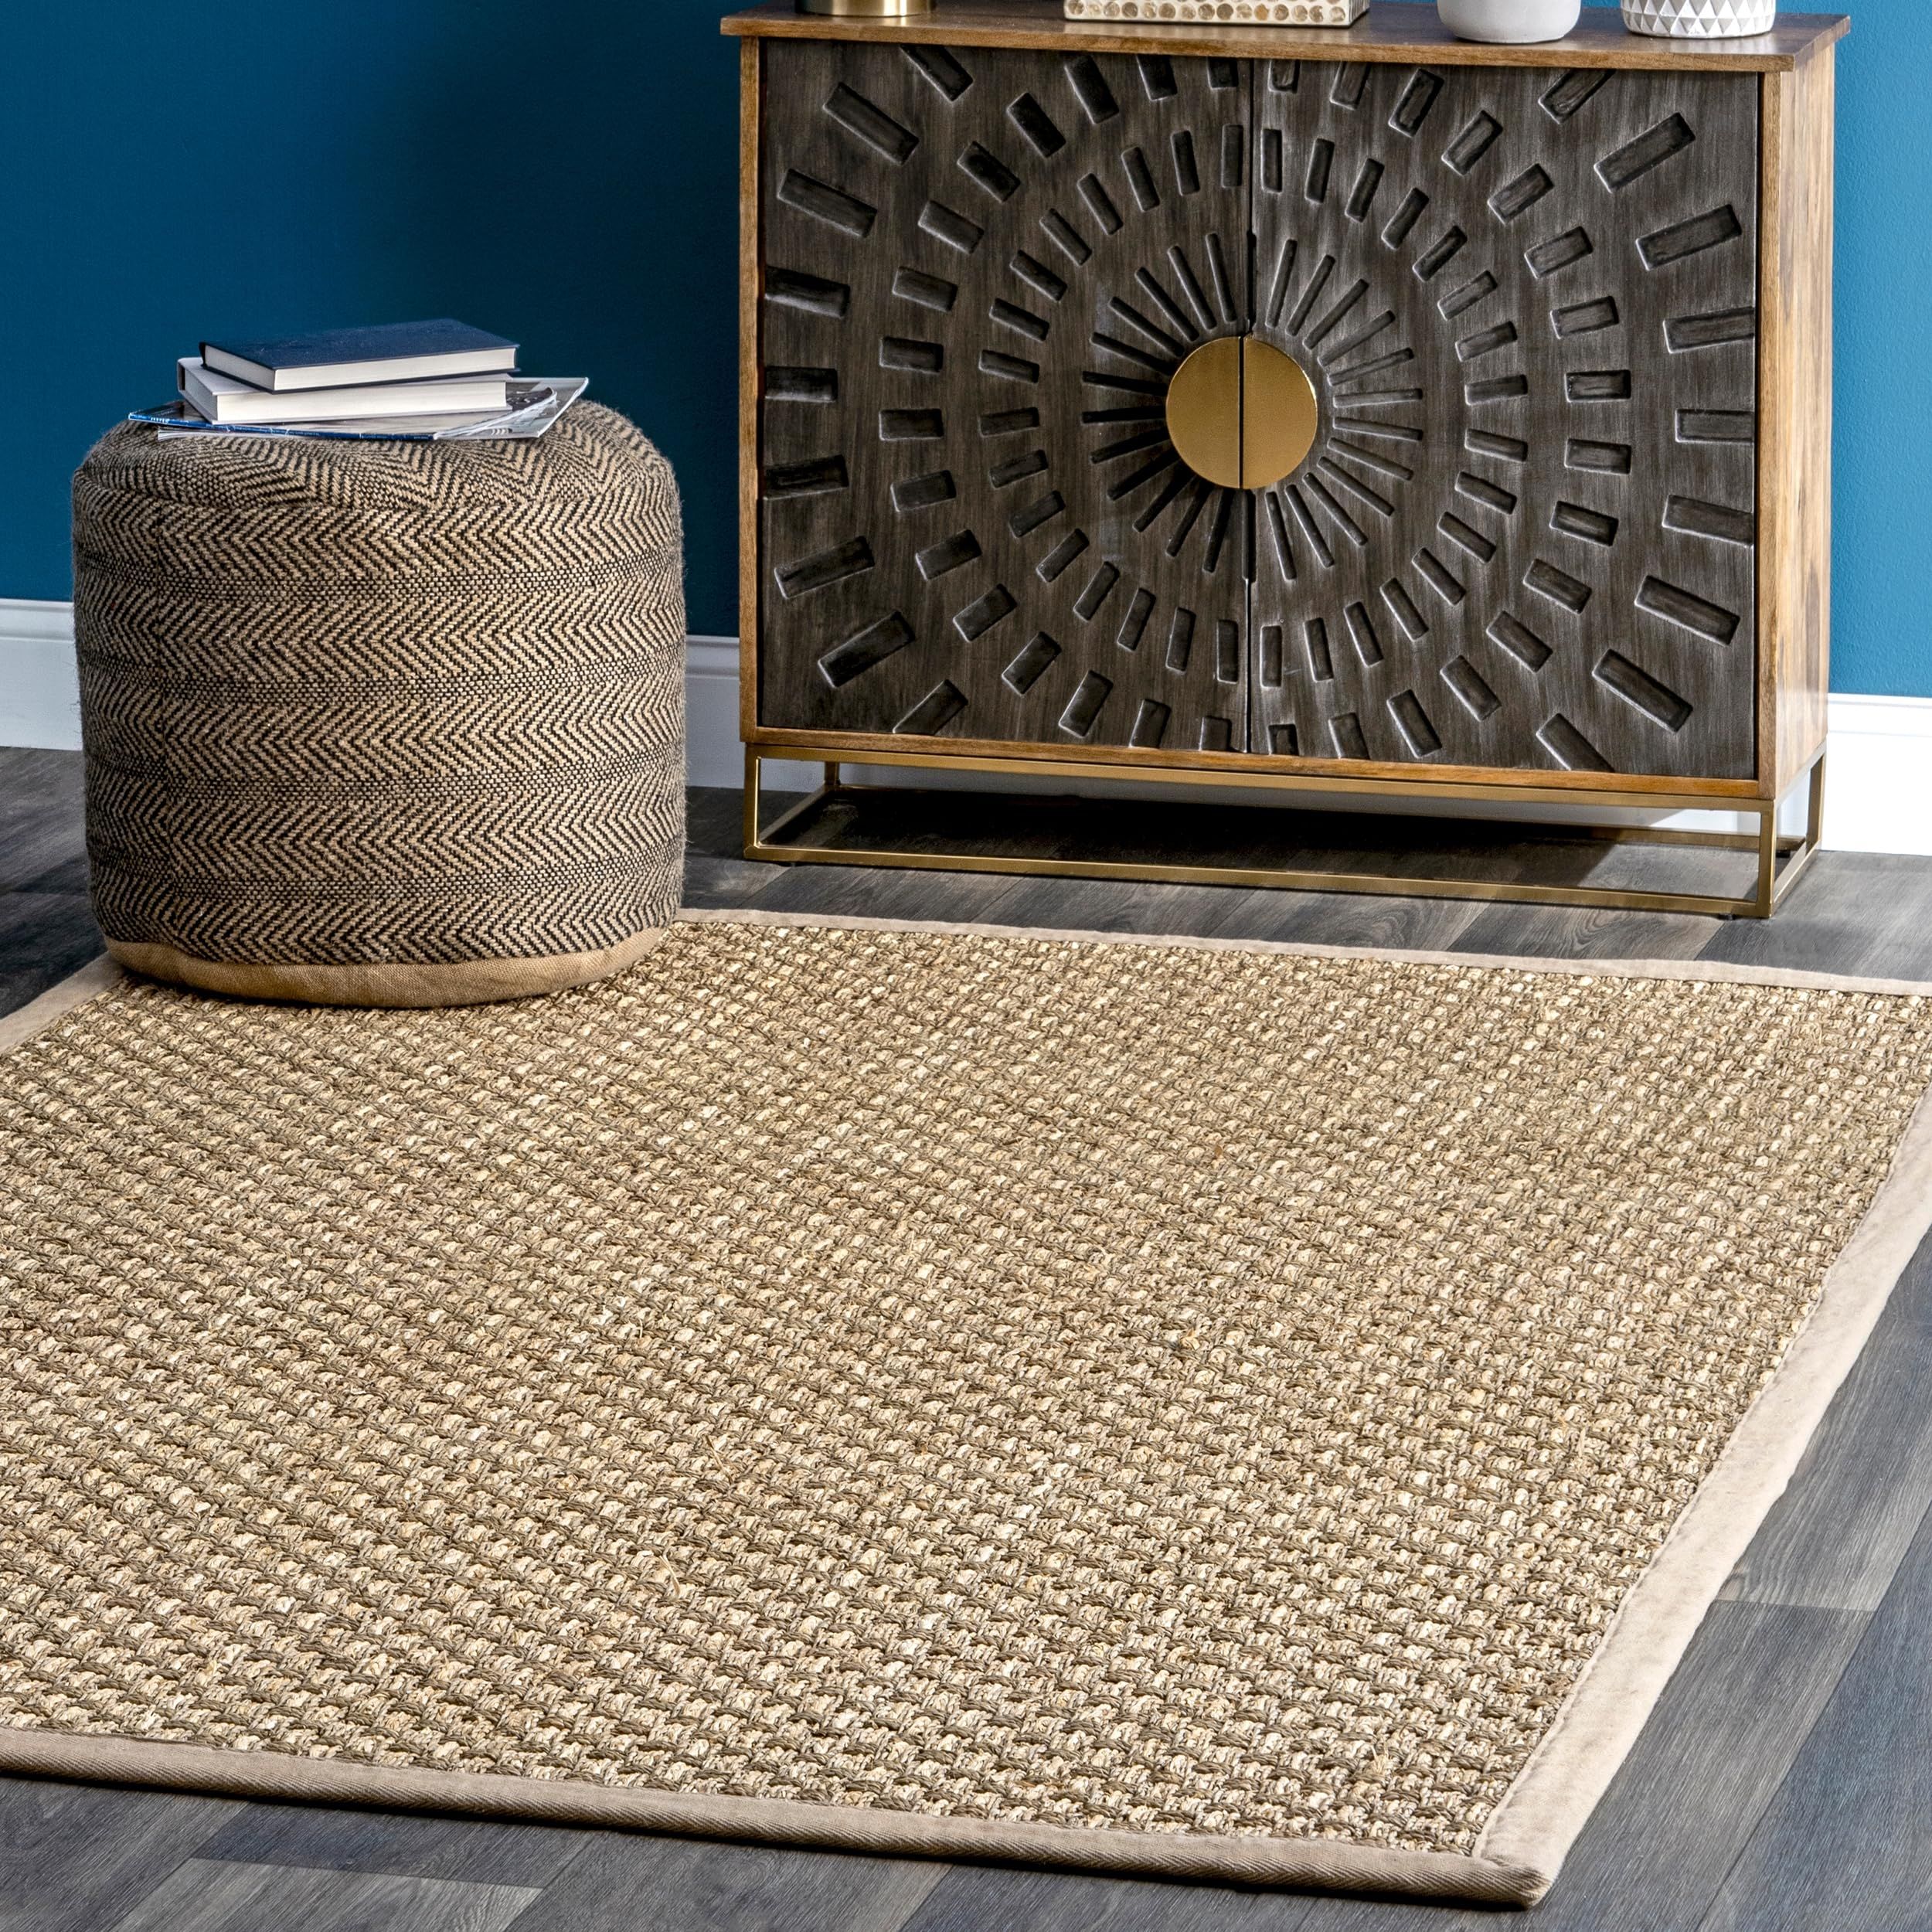 nuLOOM Spero Seagrass Basketweave Bordered Area Rug, 9' x 12', Natural | Amazon (US)